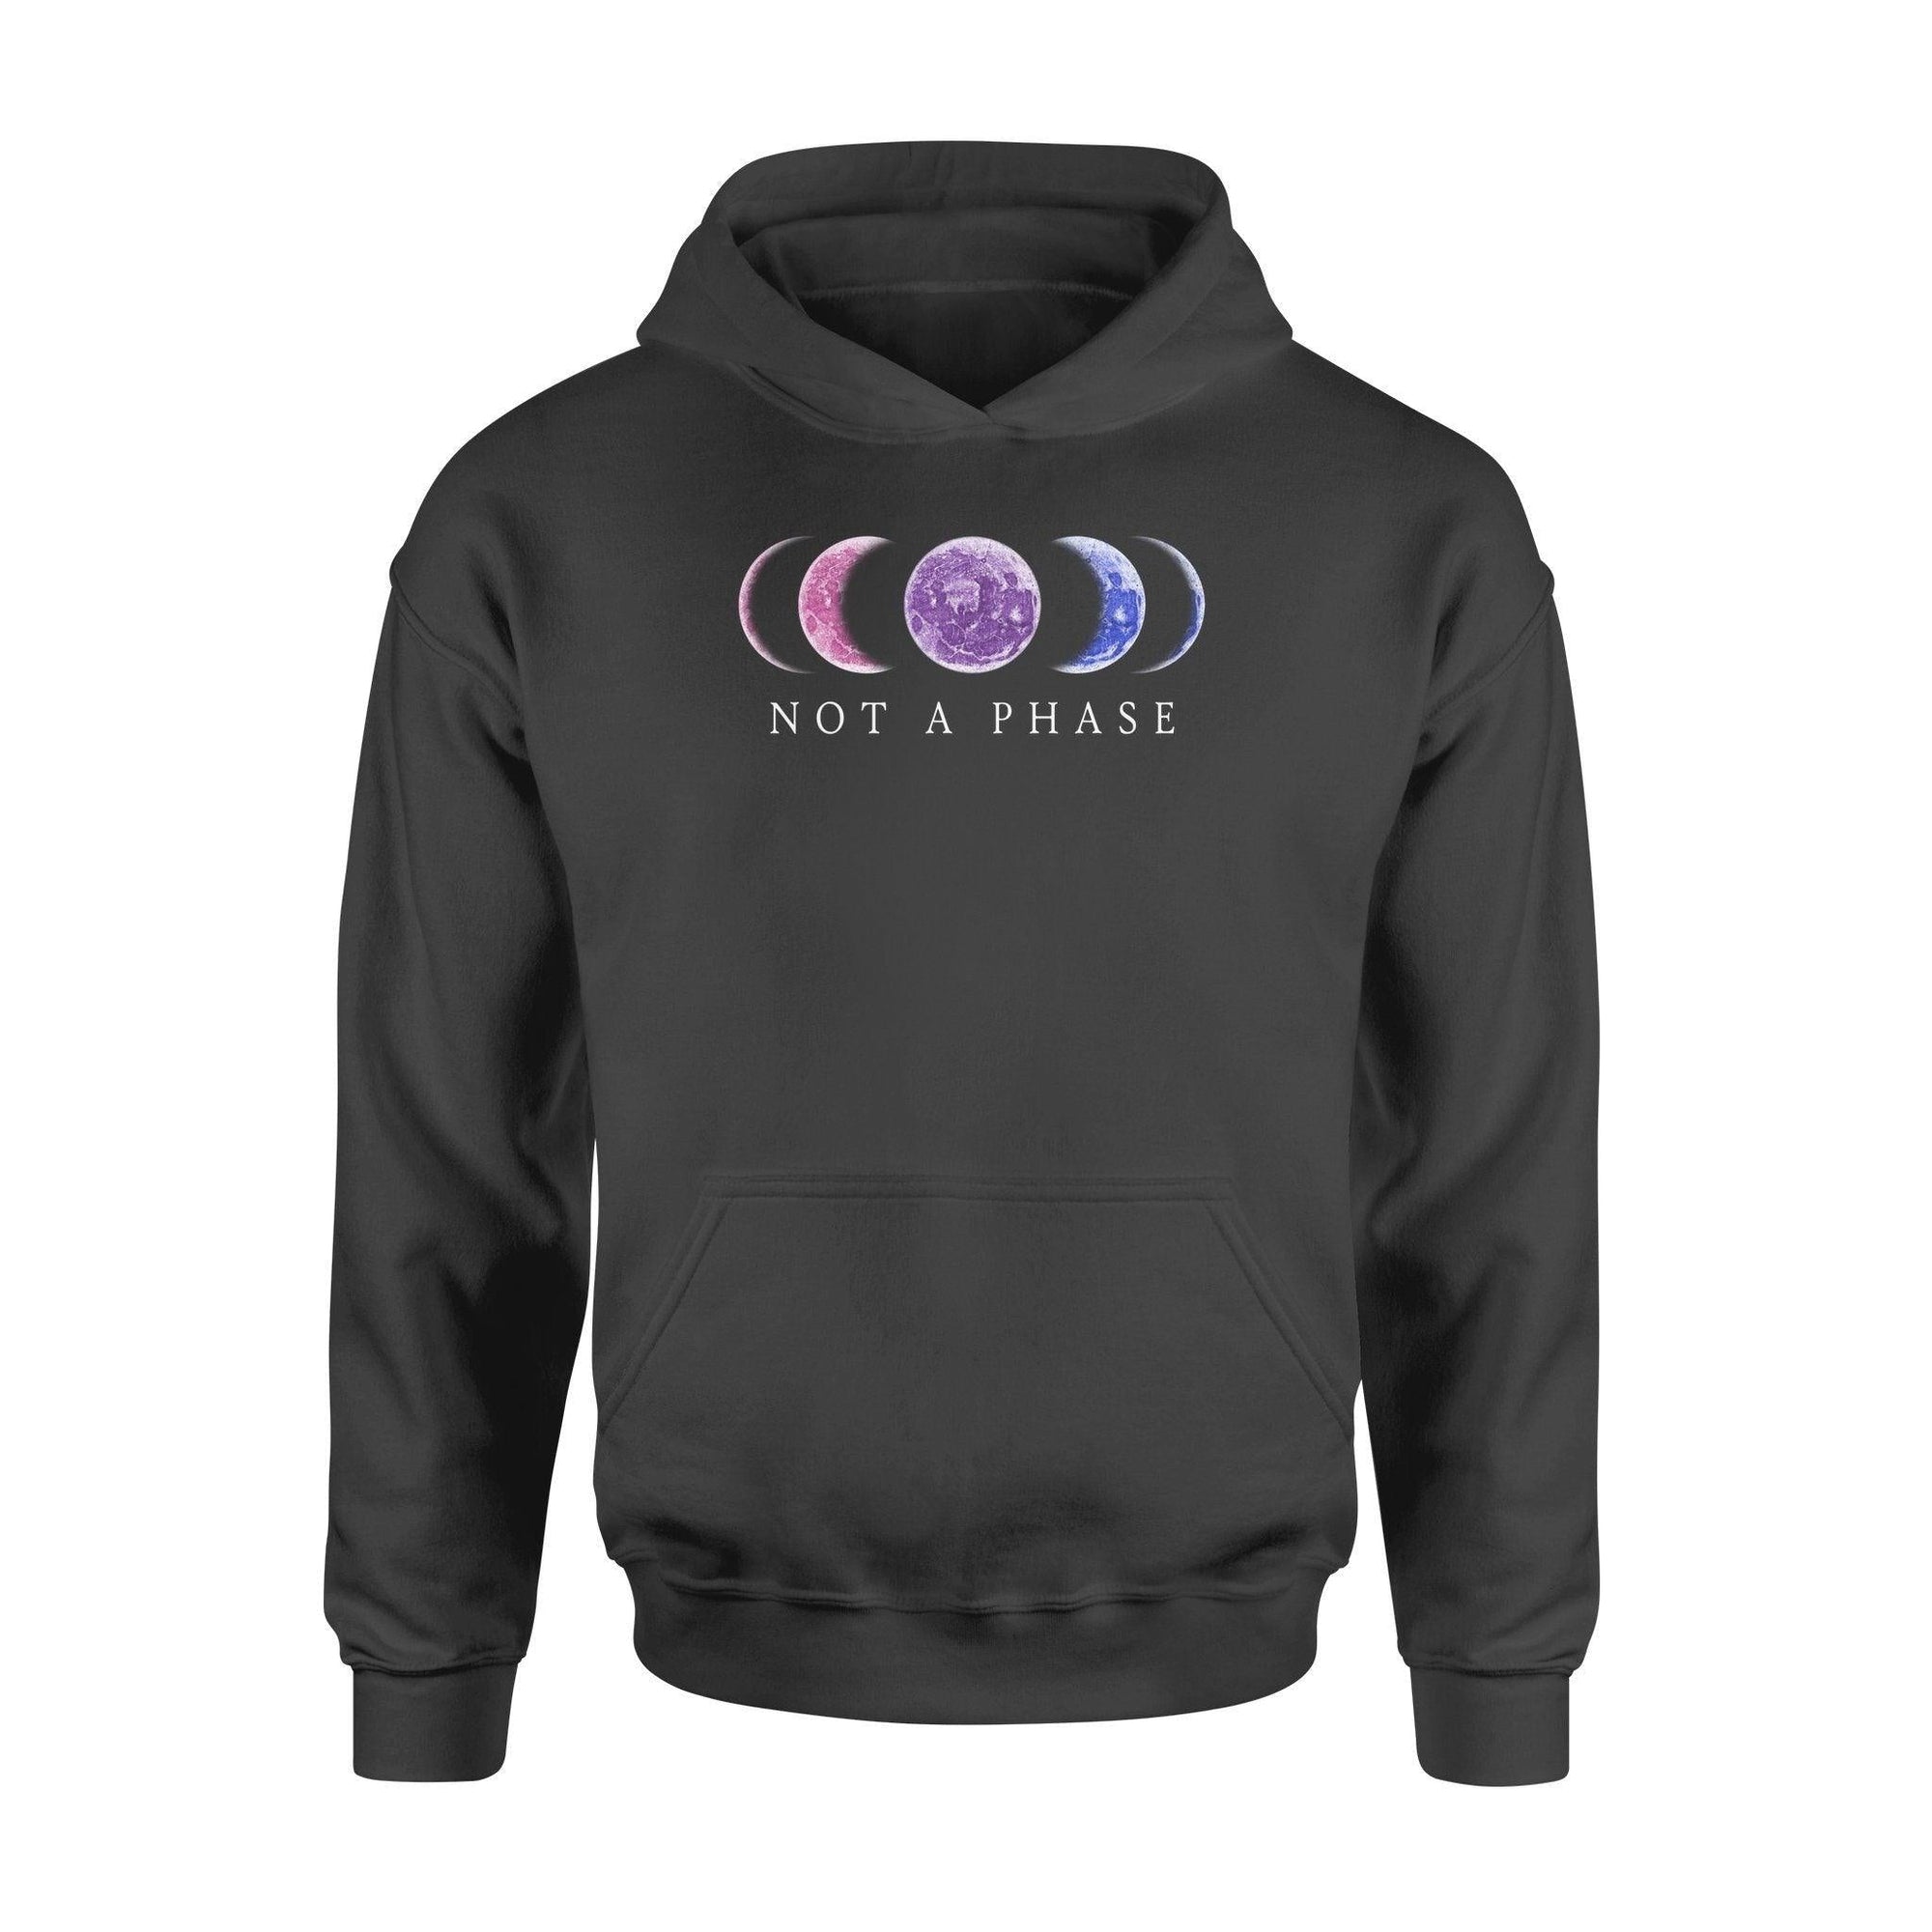 Not A Phase LGBT Bisexual Hoodie - PERSONAL84